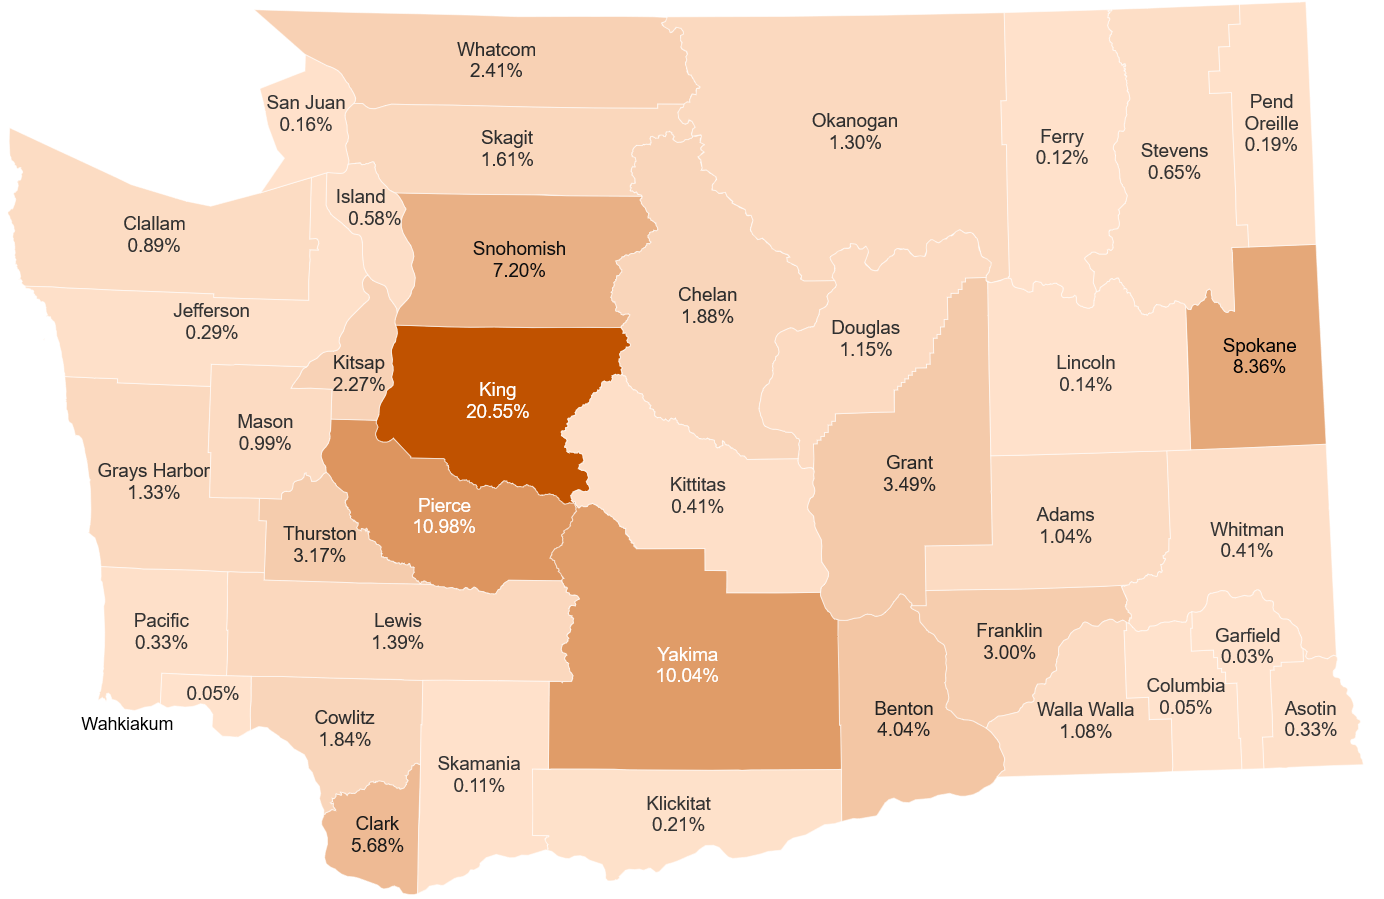 Map of Washington State showing counties and percentage of applications